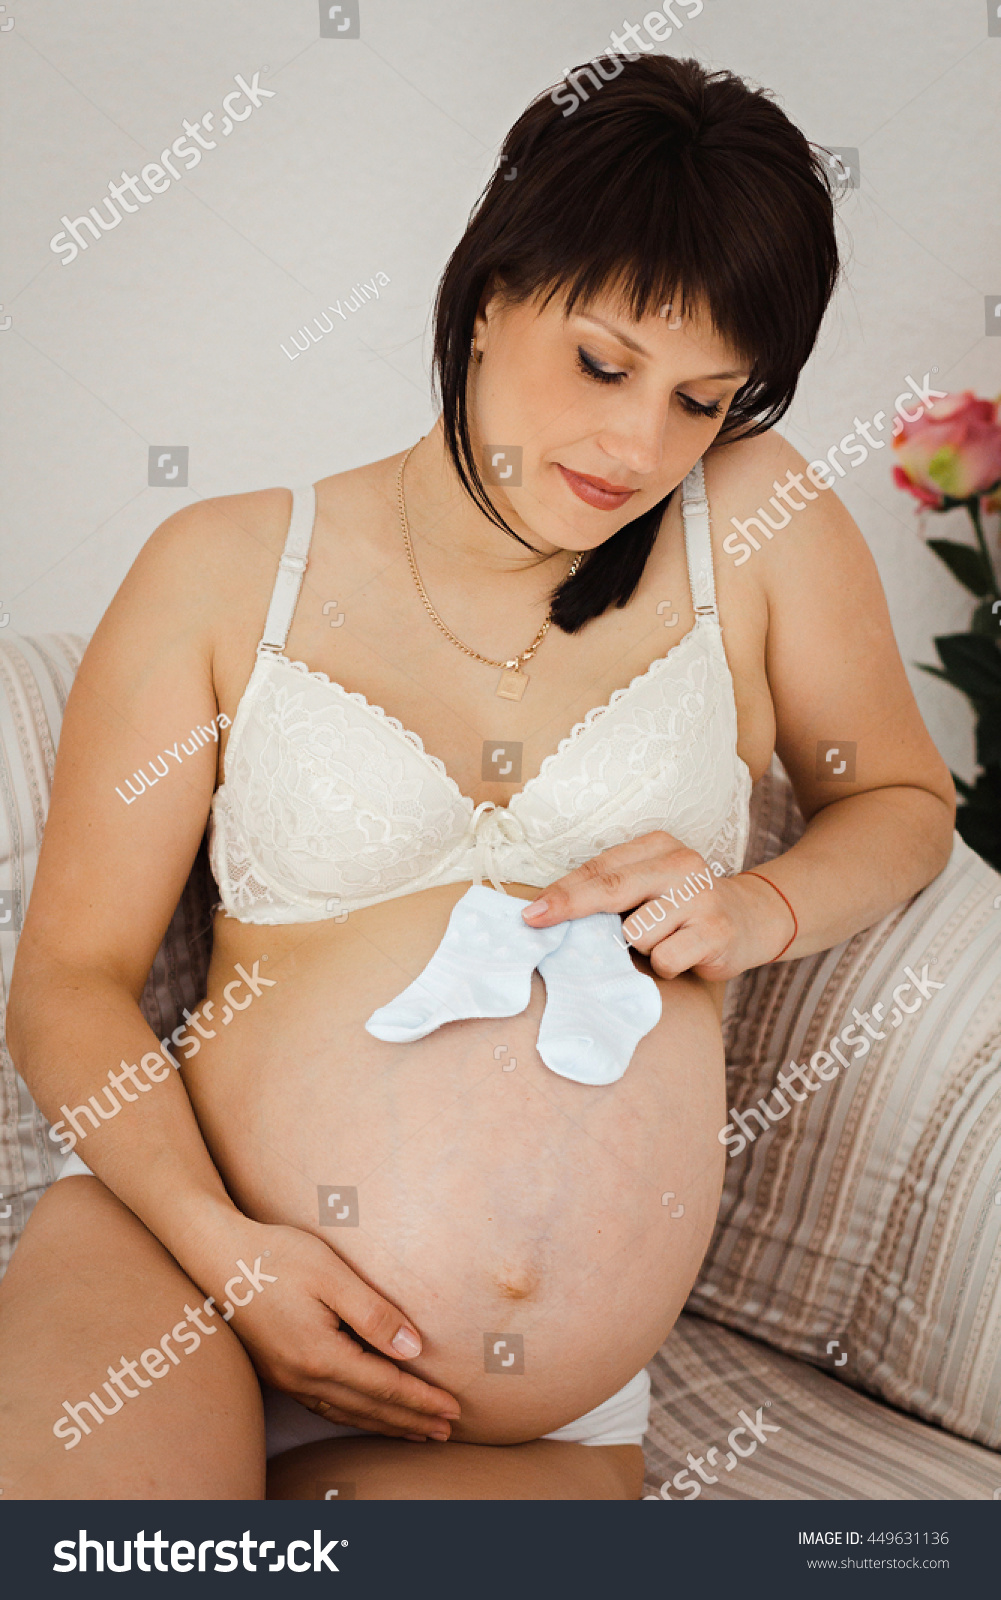 Job For Pregnant Woman 24